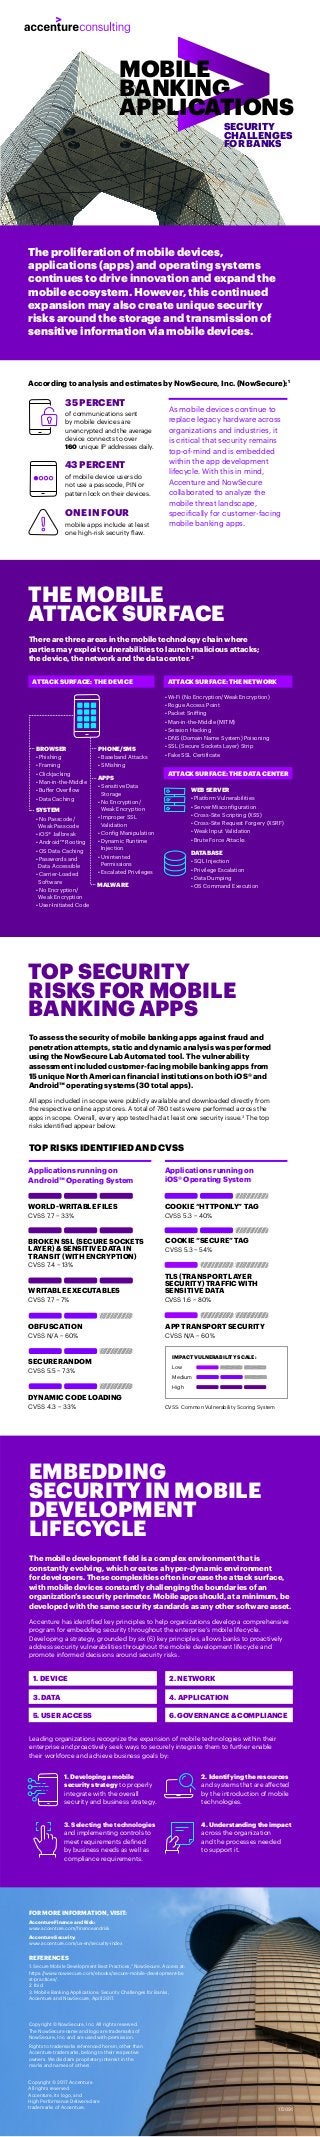 THE MOBILE
ATTACK SURFACE
Copyright © 2017 Accenture
All rights reserved.
Accenture, its logo, and
High Performance Delivered are
trademarks of Accenture. 172091
SECURITY
CHALLENGES
FOR BANKS
According to analysis and estimates by NowSecure, Inc. (NowSecure):1
The proliferation of mobile devices,
applications (apps) and operating systems
continues to drive innovation and expand the
mobile ecosystem. However, this continued
expansion may also create unique security
risks around the storage and transmission of
sensitive information via mobile devices.
ATTACK SURFACE: THE DEVICE ATTACK SURFACE: THE NETWORK
ATTACK SURFACE: THE DATA CENTER
• Wi-Fi (No Encryption/Weak Encryption)
• Rogue Access Point
• Packet Sniffing
• Man-in-the-Middle (MITM)
• Session Hacking
• DNS (Domain Name System) Poisoning
• SSL (Secure Sockets Layer) Strip
• Fake SSL Certificate
WEB SERVER
• Platform Vulnerabilities
• Server Misconfiguration
• Cross-Site Scripting (XSS)
• Cross-Site Request Forgery (XSRF)
• Weak Input Validation
• Brute Force Attacks
DATABASE
• SQL Injection
• Privilege Escalation
• Data Dumping
• OS Command Execution
BROWSER
• Phishing
• Framing
• Clickjacking
• Man-in-the-Middle
• Buffer Overflow
• Data Caching
PHONE/SMS
• Baseband Attacks
• SMishing
MALWARE
SYSTEM
• No Passcode/
Weak Passcode
• iOS® Jailbreak
• Android™ Rooting
• OS Data Caching
• Passwords and
Data Accessible
• Carrier-Loaded
Software
• No Encryption/
Weak Encryption
• User-Initiated Code
APPS
• Sensitive Data
Storage
• No Encryption/
Weak Encryption
• Improper SSL
Validation
• Config Manipulation
• Dynamic Runtime
Injection
• Unintented
Permissions
• Escalated Privileges
There are three areas in the mobile technology chain where
parties may exploit vulnerabilities to launch malicious attacks;
the device, the network and the data center.2
FOR MORE INFORMATION, VISIT:
Accenture Finance and Risk:
www.accenture.com/financeandrisk
Accenture Security:
www.accenture.com/us-en/security-index
REFERENCES
1. Secure Mobile Development Best Practices,” NowSecure. Access at:
https://www.nowsecure.com/ebooks/secure-mobile-development-be
st-practices/.
2. Ibid
3. Mobile Banking Applications: Security Challenges for Banks,
Accenture and NowSecure, April 2017.
Copyright © NowSecure, Inc. All rights reserved.
The NowSecure name and logo are trademarks of
NowSecure, Inc. and are used with permission.
Rights to trademarks referenced herein, other than
Accenture trademarks, belong to their respective
owners. We disclaim proprietary interest in the
marks and names of others.
35 PERCENT
of communications sent
by mobile devices are
unencrypted and the average
device connects to over
160 unique IP addresses daily.
As mobile devices continue to
replace legacy hardware across
organizations and industries, it
is critical that security remains
top-of-mind and is embedded
within the app development
lifecycle. With this in mind,
Accenture and NowSecure
collaborated to analyze the
mobile threat landscape,
specifically for customer-facing
mobile banking apps.
ONE IN FOUR
mobile apps include at least
one high-risk security flaw.
43 PERCENT
of mobile device users do
not use a passcode, PIN or
pattern lock on their devices.
TOP SECURITY
RISKS FOR MOBILE
BANKING APPS
To assess the security of mobile banking apps against fraud and
penetration attempts, static and dynamic analysis was performed
using the NowSecure Lab Automated tool. The vulnerability
assessment included customer-facing mobile banking apps from
15 unique North American financial institutions on both iOS® and
Android™ operating systems (30 total apps).
All apps included in scope were publicly available and downloaded directly from
the respective online app stores. A total of 780 tests were performed across the
apps in scope. Overall, every app tested had at least one security issue.3
The top
risks identified appear below.
Applications running on
Android™ Operating System
Applications running on
iOS® Operating System
WORLD-WRITABLE FILES
CVSS 7.7 – 33%
WRITABLE EXECUTABLES
CVSS 7.7 – 7%
BROKEN SSL (SECURE SOCKETS
LAYER) & SENSITIVE DATA IN
TRANSIT (WITH ENCRYPTION)
CVSS 7.4 – 13%
OBFUSCATION
CVSS N/A – 60%
SECURERANDOM
CVSS 5.5 – 73%
COOKIE “HTTPONLY” TAG
CVSS 5.3 – 40%
TLS (TRANSPORT LAYER
SECURITY) TRAFFIC WITH
SENSITIVE DATA
CVSS 1.6 – 80%
APP TRANSPORT SECURITY
CVSS N/A – 60%
DYNAMIC CODE LOADING
CVSS 4.3 – 33%
IMPACT VULNERABILITY SCALE:
Low
Medium
High
BANKING
MOBILE
APPLICATIONS
EMBEDDING
SECURITY IN MOBILE
DEVELOPMENT
LIFECYCLE
The mobile development field is a complex environment that is
constantly evolving, which creates a hyper-dynamic environment
for developers. These complexities often increase the attack surface,
with mobile devices constantly challenging the boundaries of an
organization’s security perimeter. Mobile apps should, at a minimum, be
developed with the same security standards as any other software asset.
Accenture has identified key principles to help organizations develop a comprehensive
program for embedding security throughout the enterprise’s mobile lifecycle.
Developing a strategy, grounded by six (6) key principles, allows banks to proactively
address security vulnerabilities throughout the mobile development lifecycle and
promote informed decisions around security risks.
Leading organizations recognize the expansion of mobile technologies within their
enterprise and proactively seek ways to securely integrate them to further enable
their workforce and achieve business goals by:
4. Understanding the impact
across the organization
and the processes needed
to support it.
2. Identifying the resources
and systems that are affected
by the introduction of mobile
technologies.
3. Selecting the technologies
and implementing controls to
meet requirements defined
by business needs as well as
compliance requirements.
1. Developing a mobile
security strategy to properly
integrate with the overall
security and business strategy.
1. DEVICE 2. NETWORK
3. DATA 4. APPLICATION
5. USER ACCESS 6. GOVERNANCE & COMPLIANCE
TOP RISKS IDENTIFIED AND CVSS
COOKIE “SECURE” TAG
CVSS 5.3 – 54%
CVSS: Common Vulnerability Scoring System
 